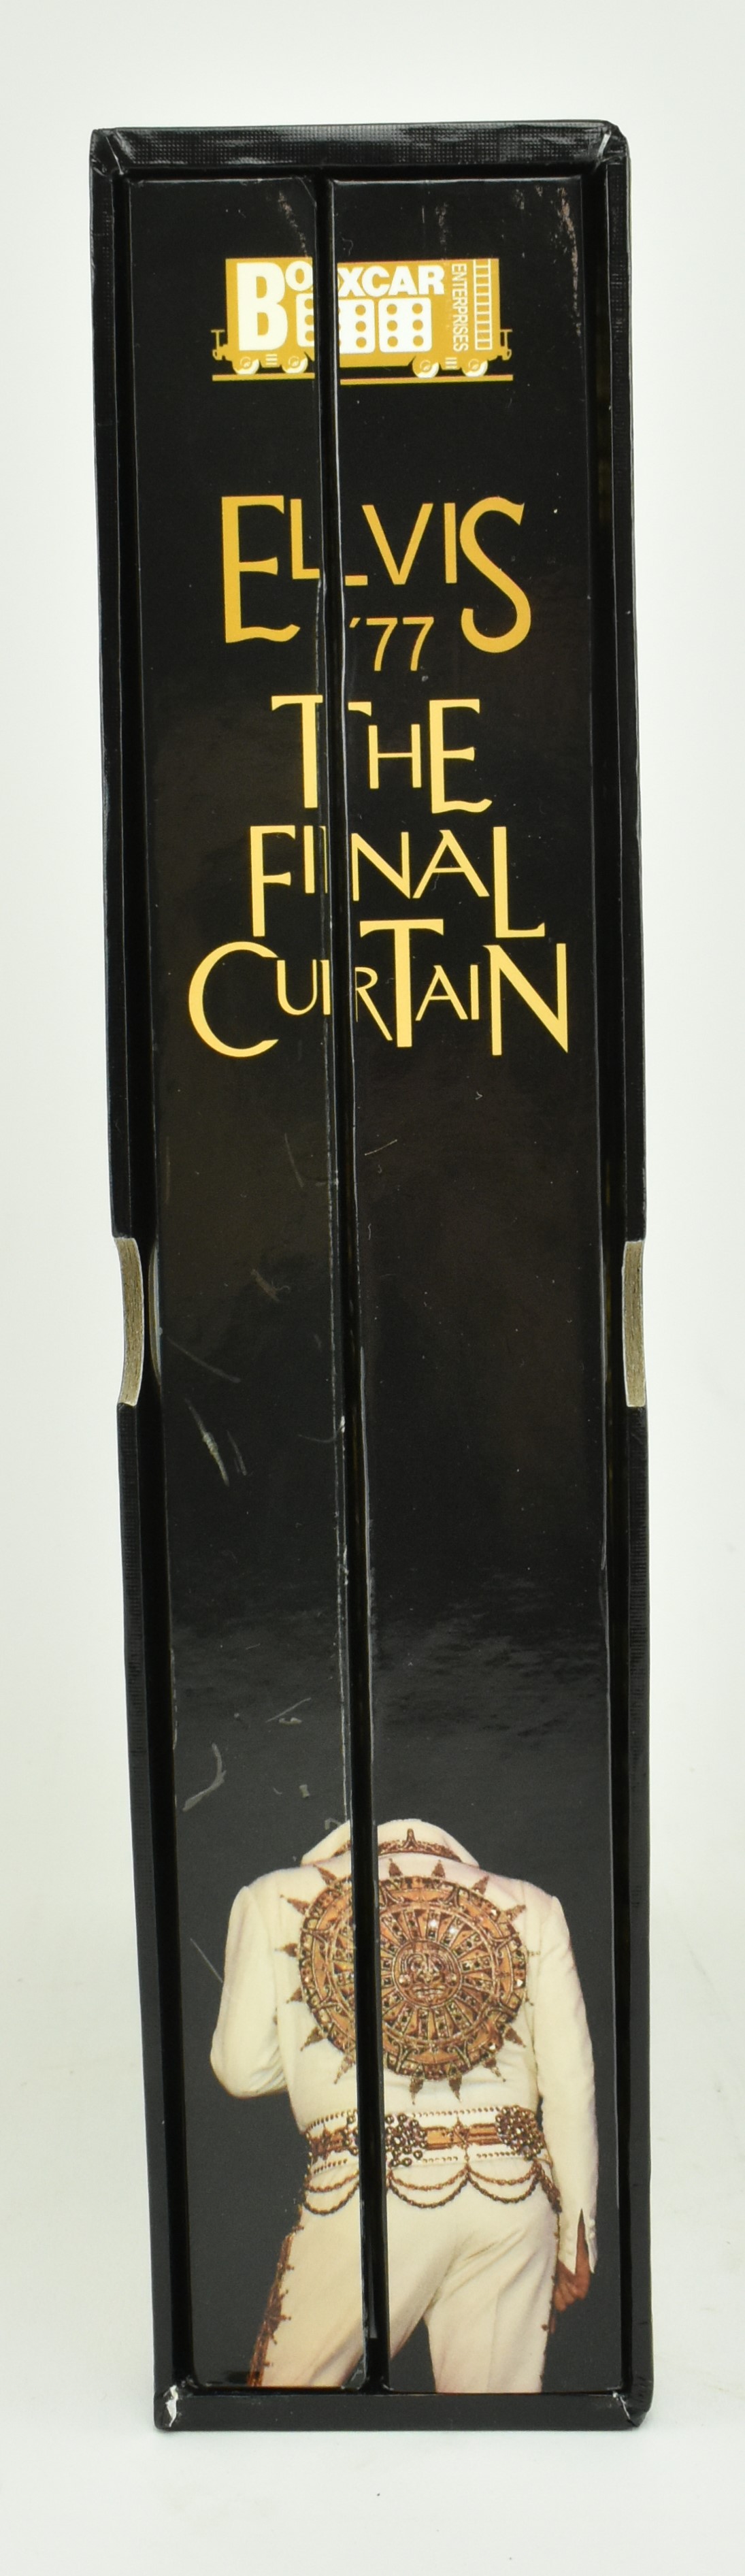 ELVIS '77 THE FINAL CURTAIN PRIVATELY PRINTED BOX SET - Image 2 of 9